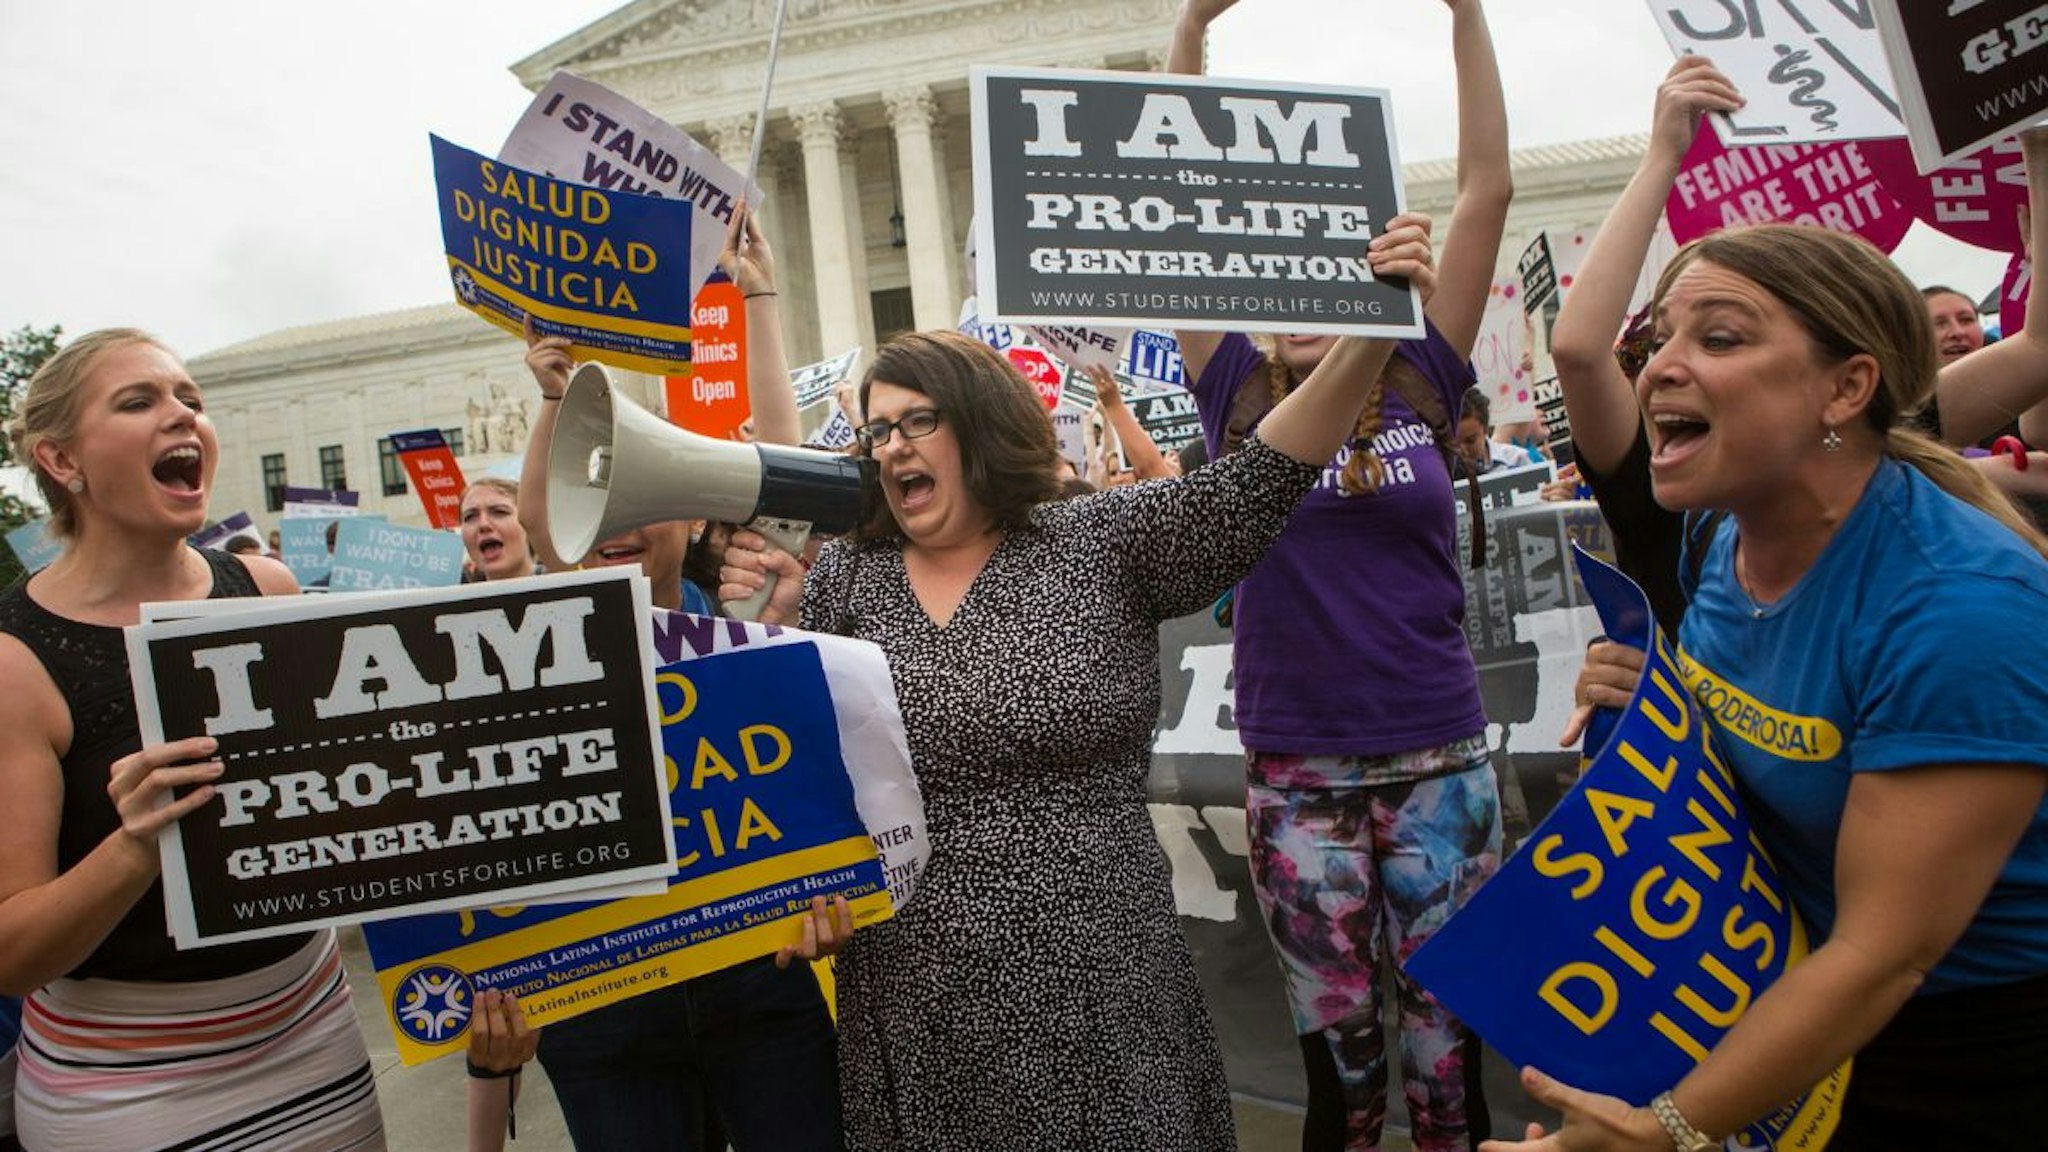 Kristan Hawkins, president of Students for Life, center, and other pro-life protesters clash with pro-choice protesters in front of the U.S. Supreme Court on a day where two important decisions on immigration and affirmative action were handed down by the court, on June 23, 2016 in Washington, DC.